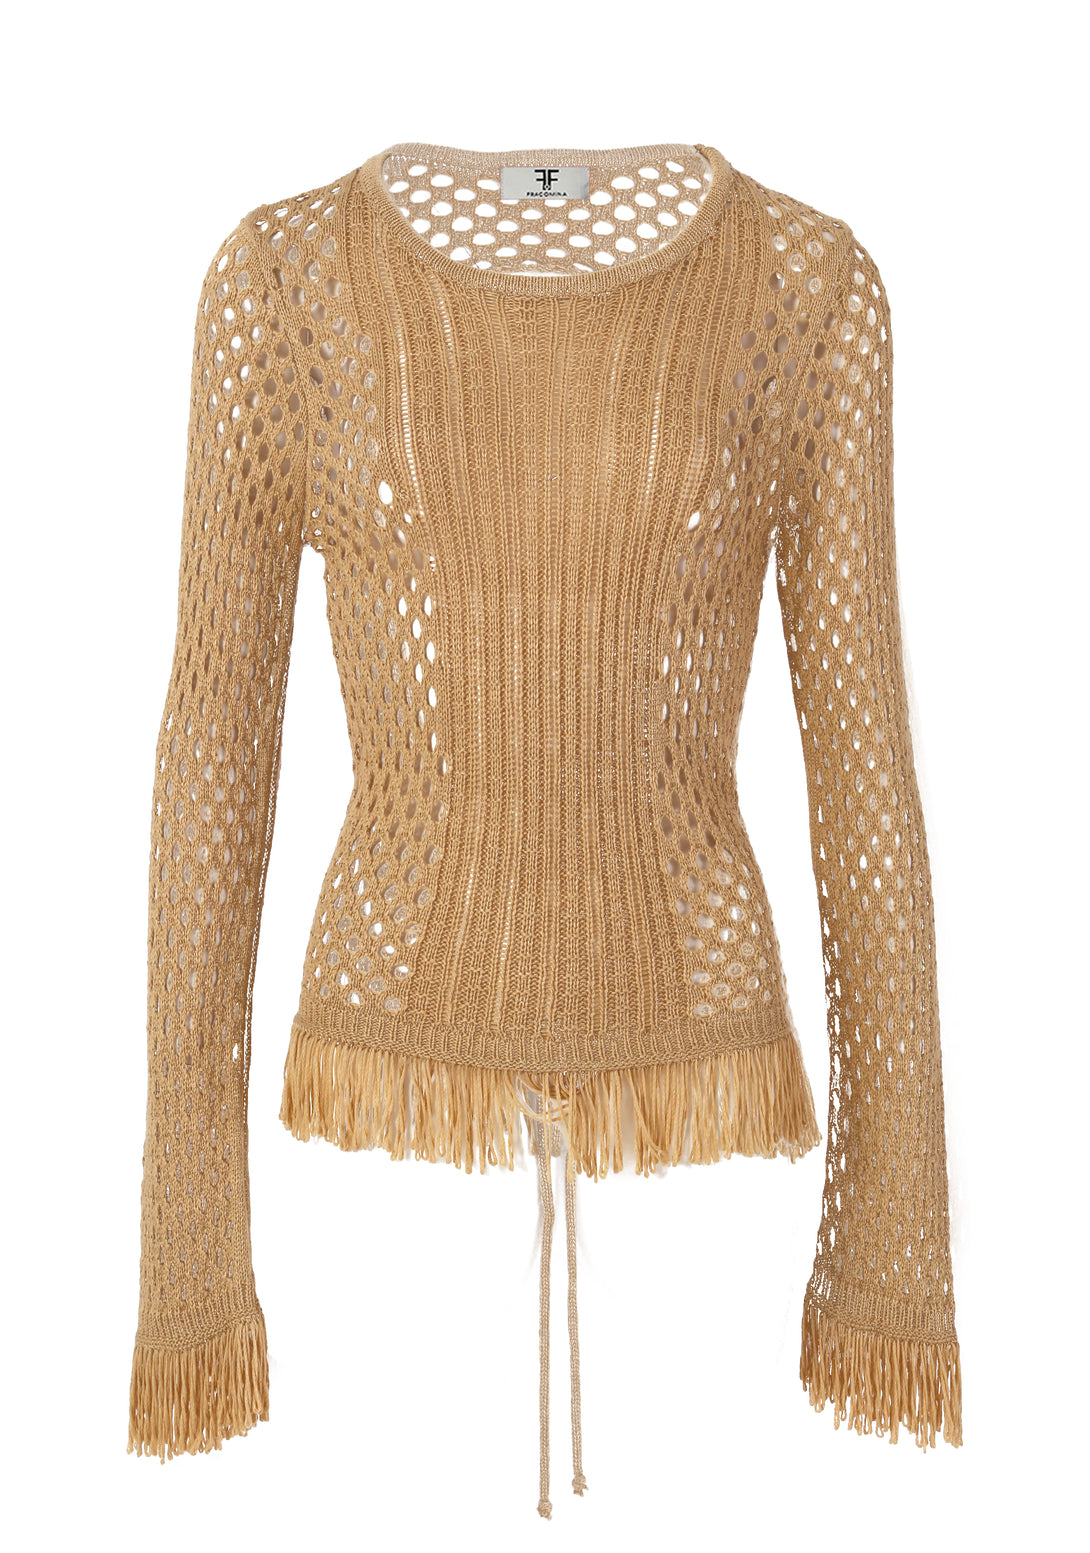 Knitted sweater regular fit with net stitch